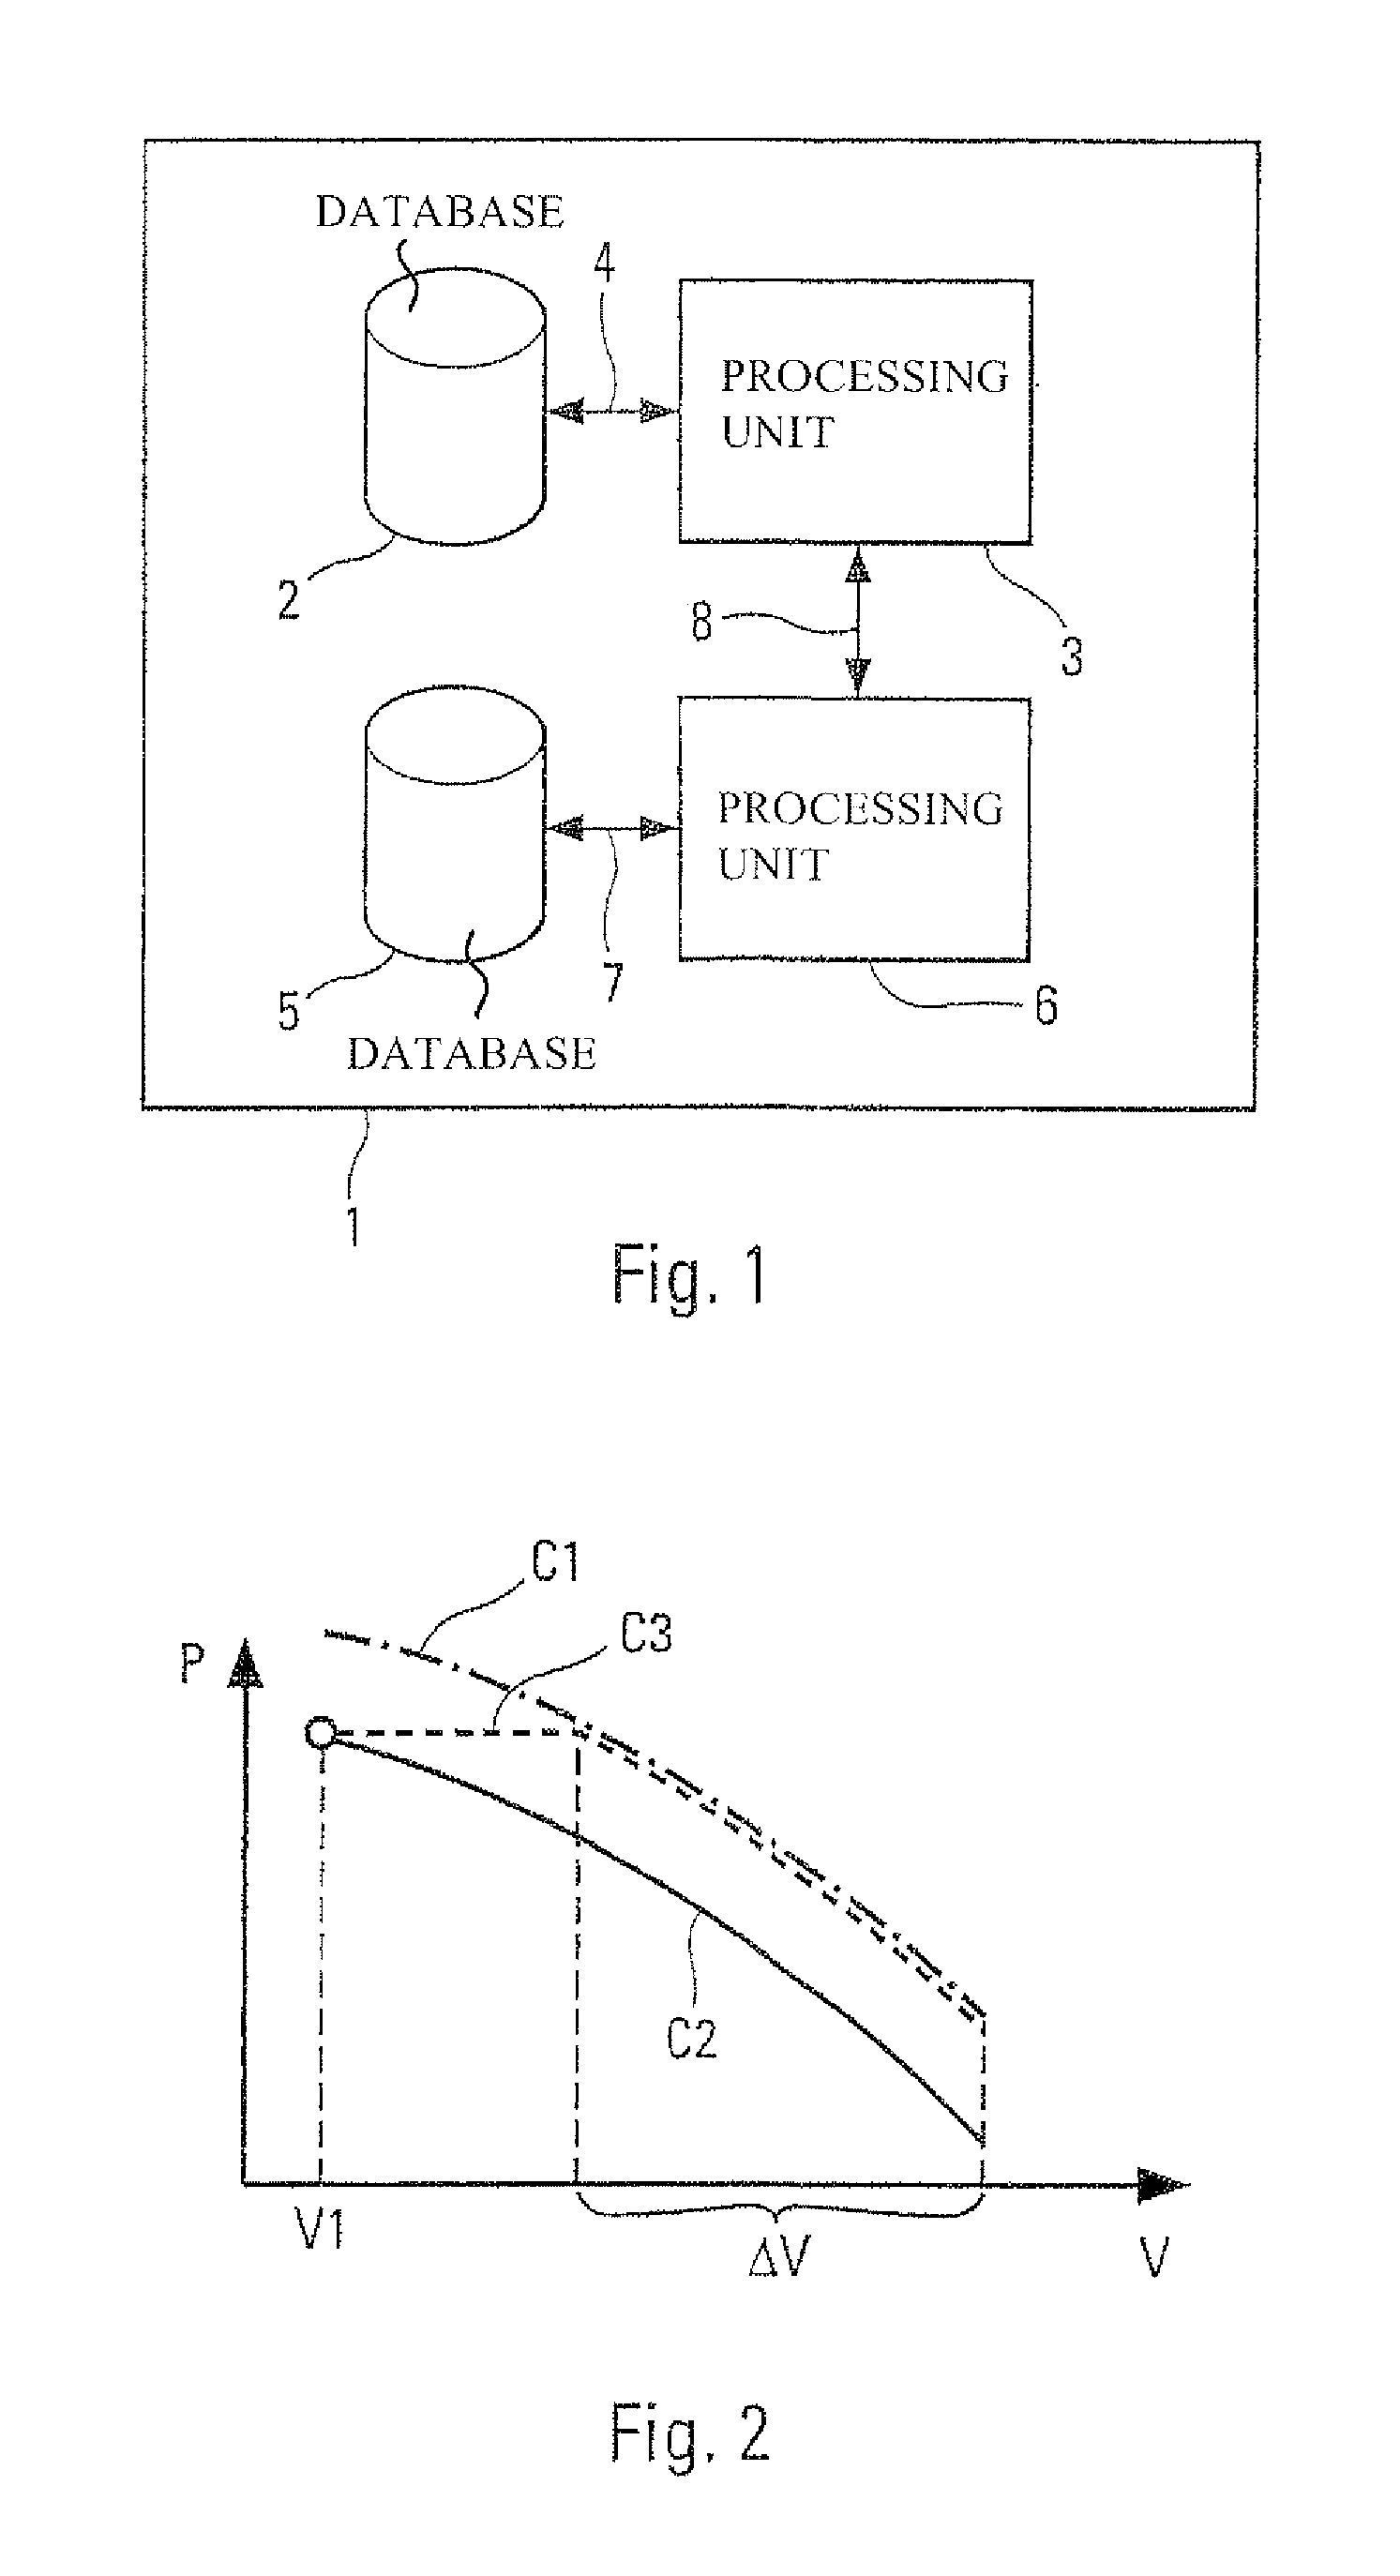 Device for constructing and securing a low altitude flight plan path intended to be followed by an aircraft